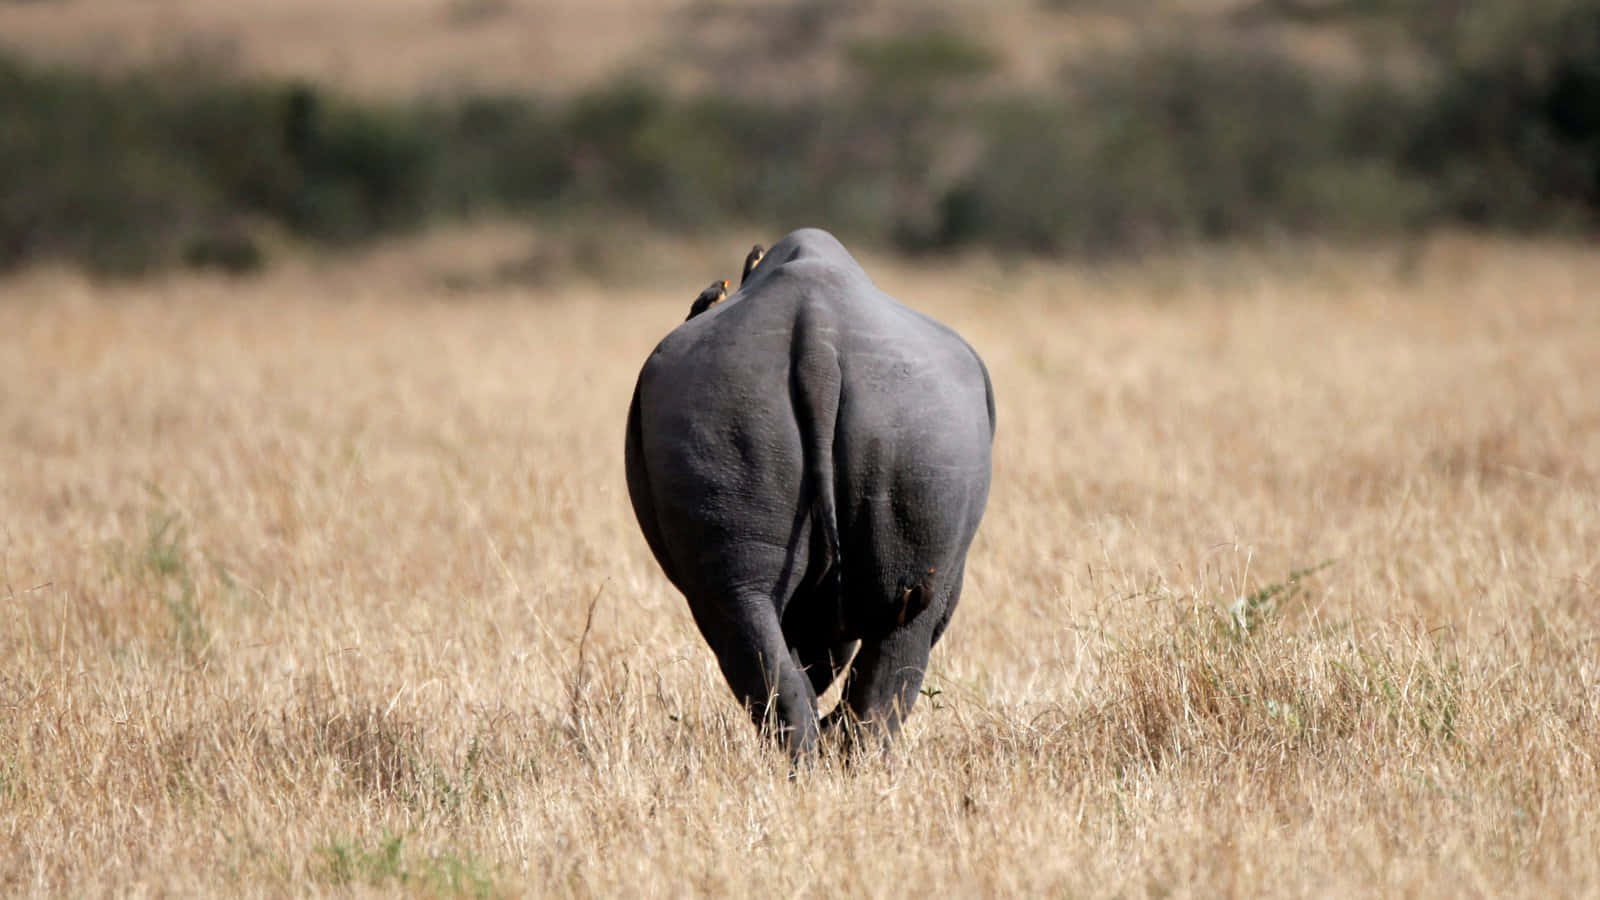 Close-up view of a rhino in its natural habitat